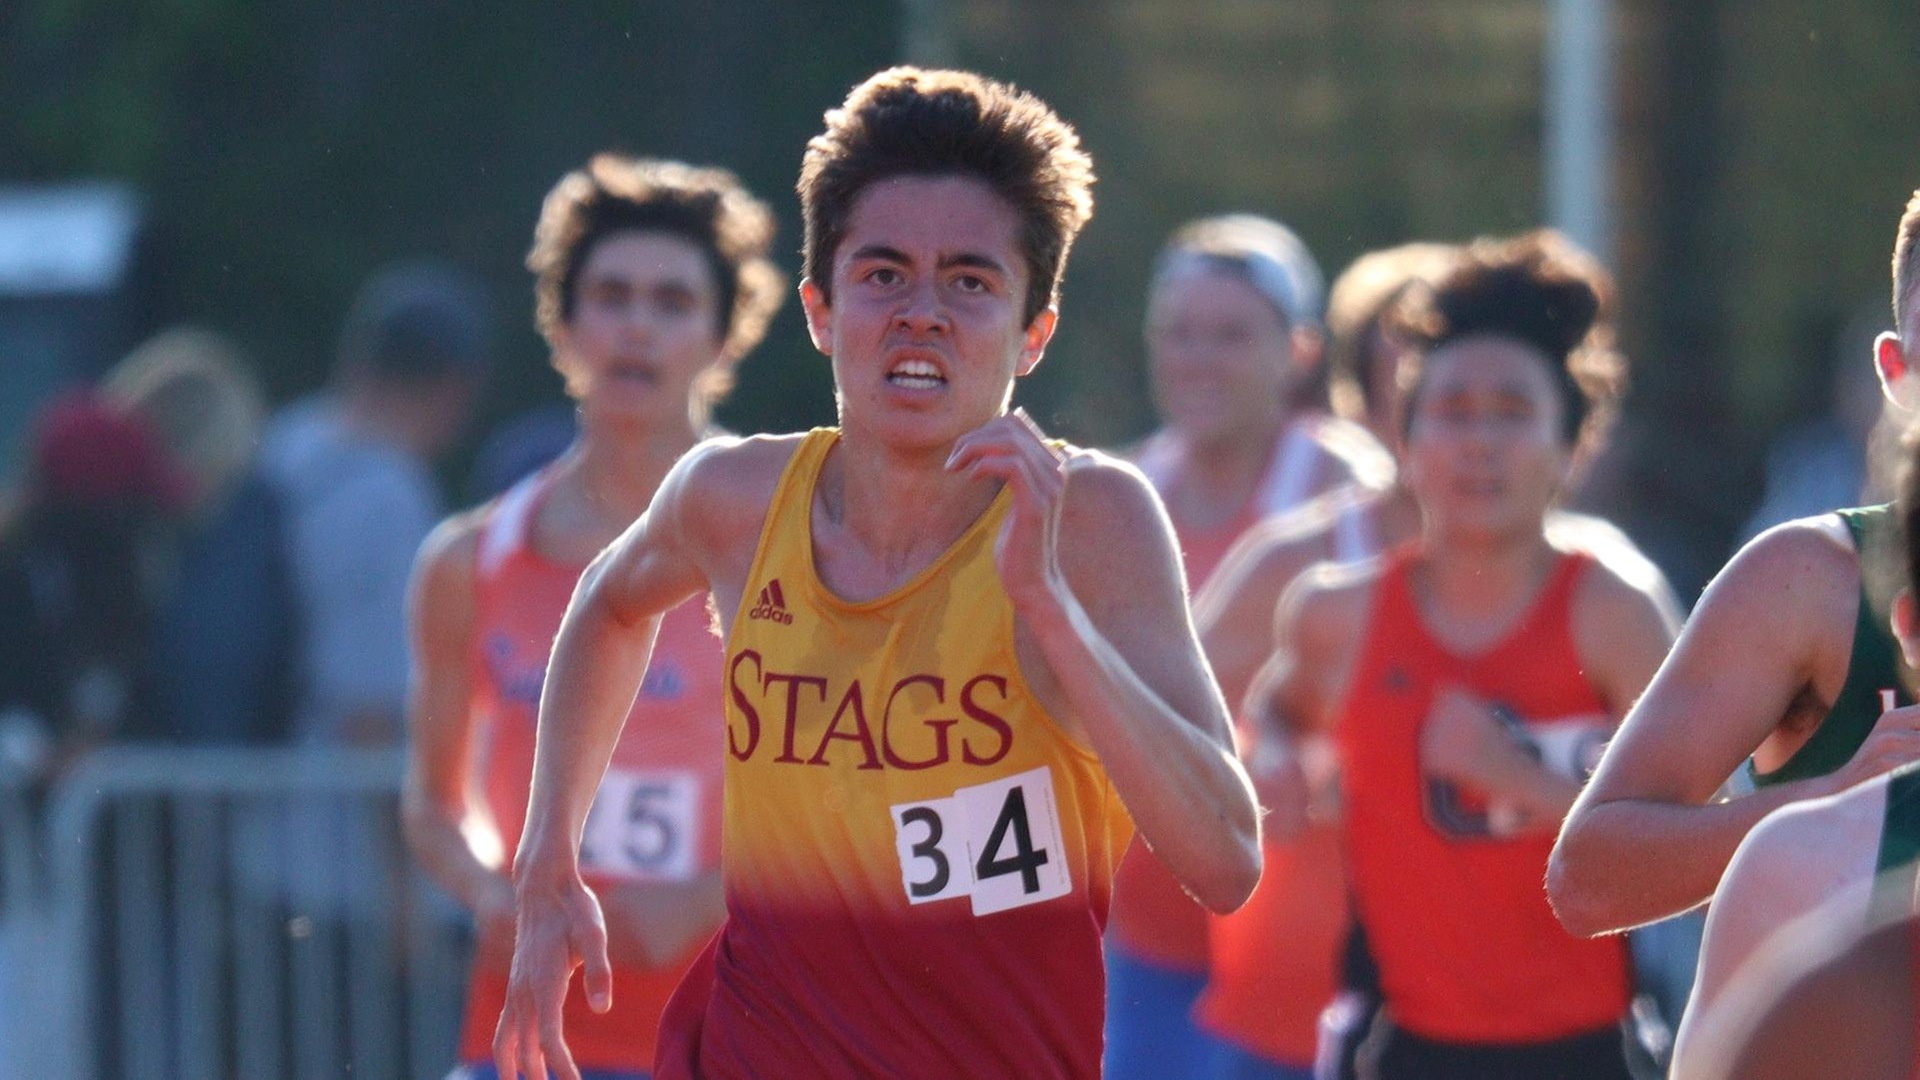 Miles Christensen on his way to the 5000 meter title at 2019 SCIACs (photo by Anibal Ortiz)